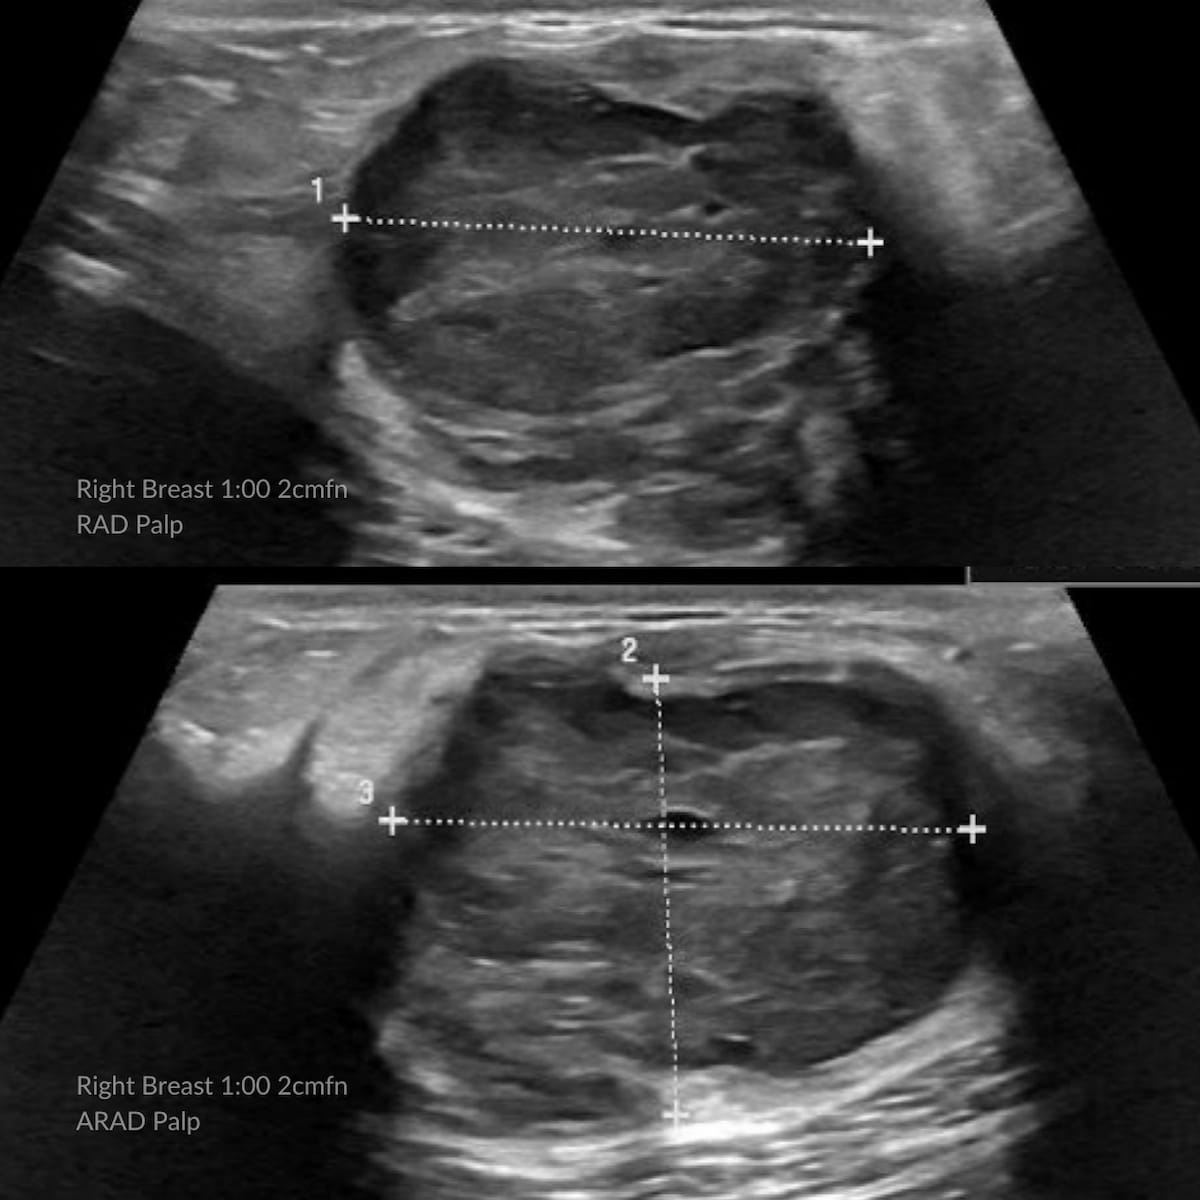 Image IQ Quiz: 25-Year-Old Patient with Enlarging Breast Mass